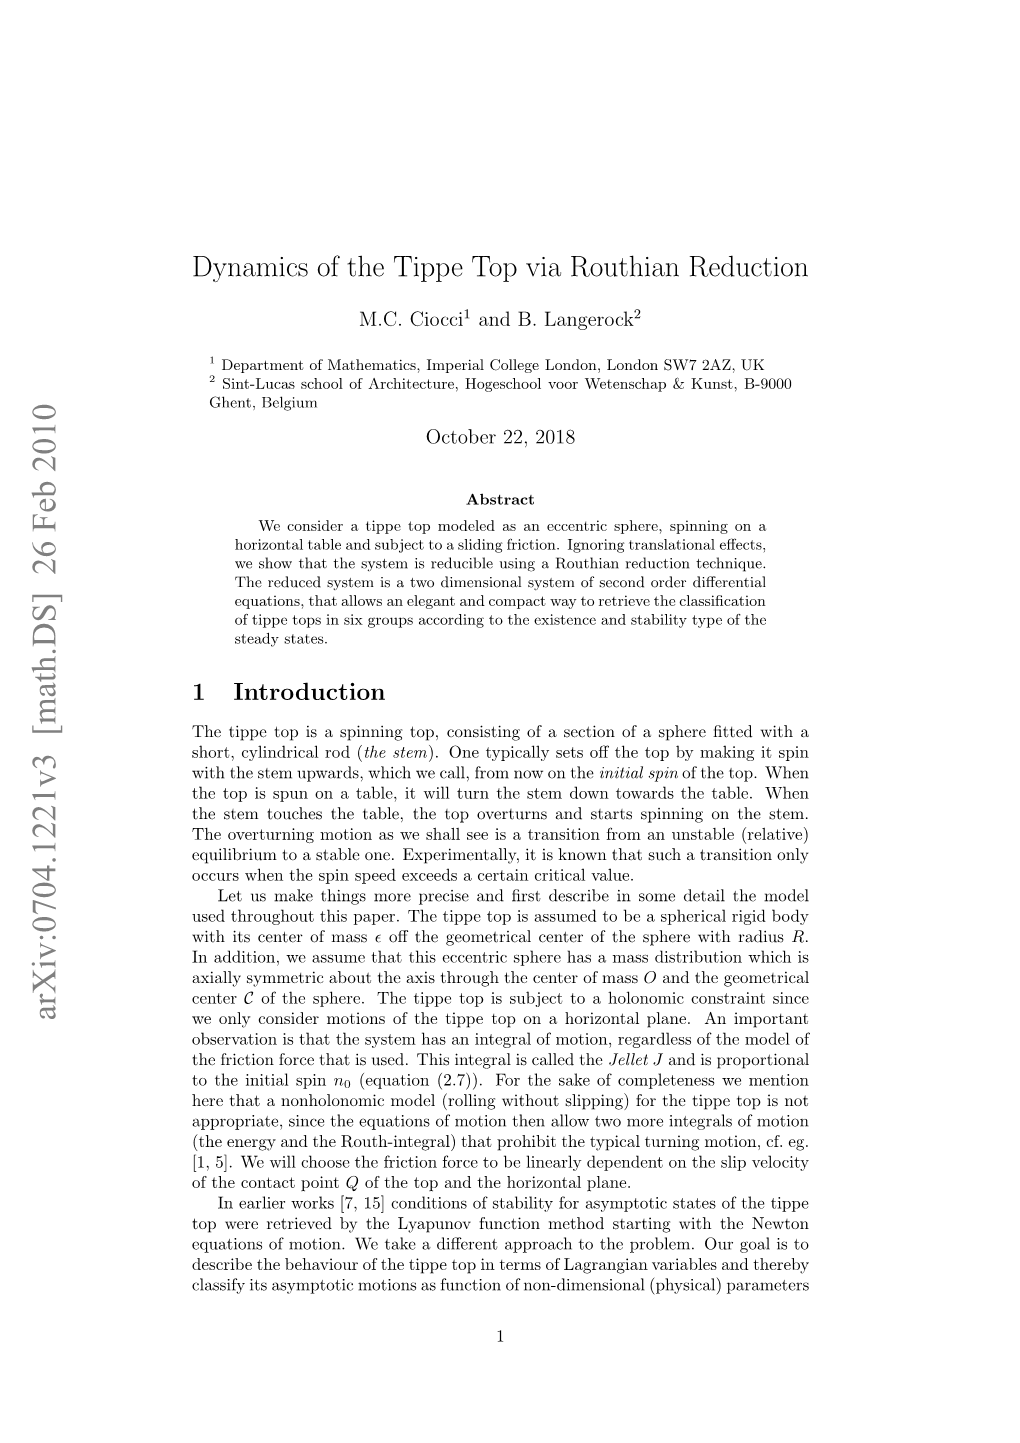 Dynamics of the Tippe Top Via Routhian Reduction